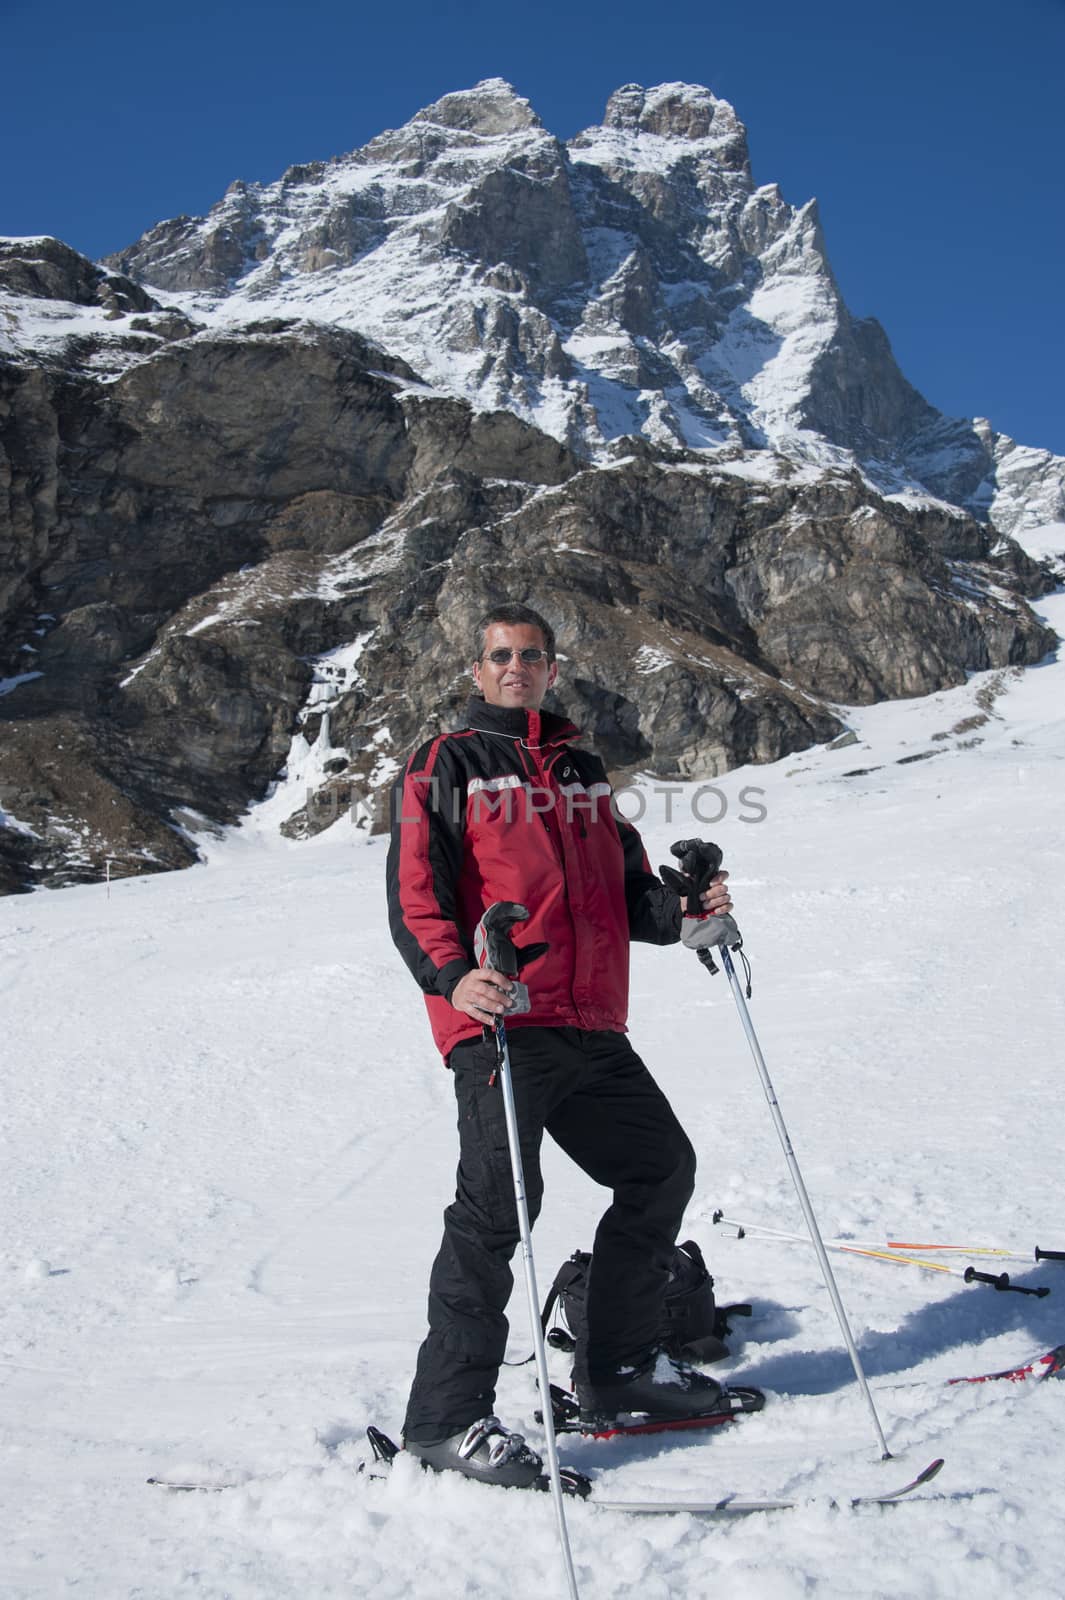 man staying on the ski, on a slope under the Matterhorn